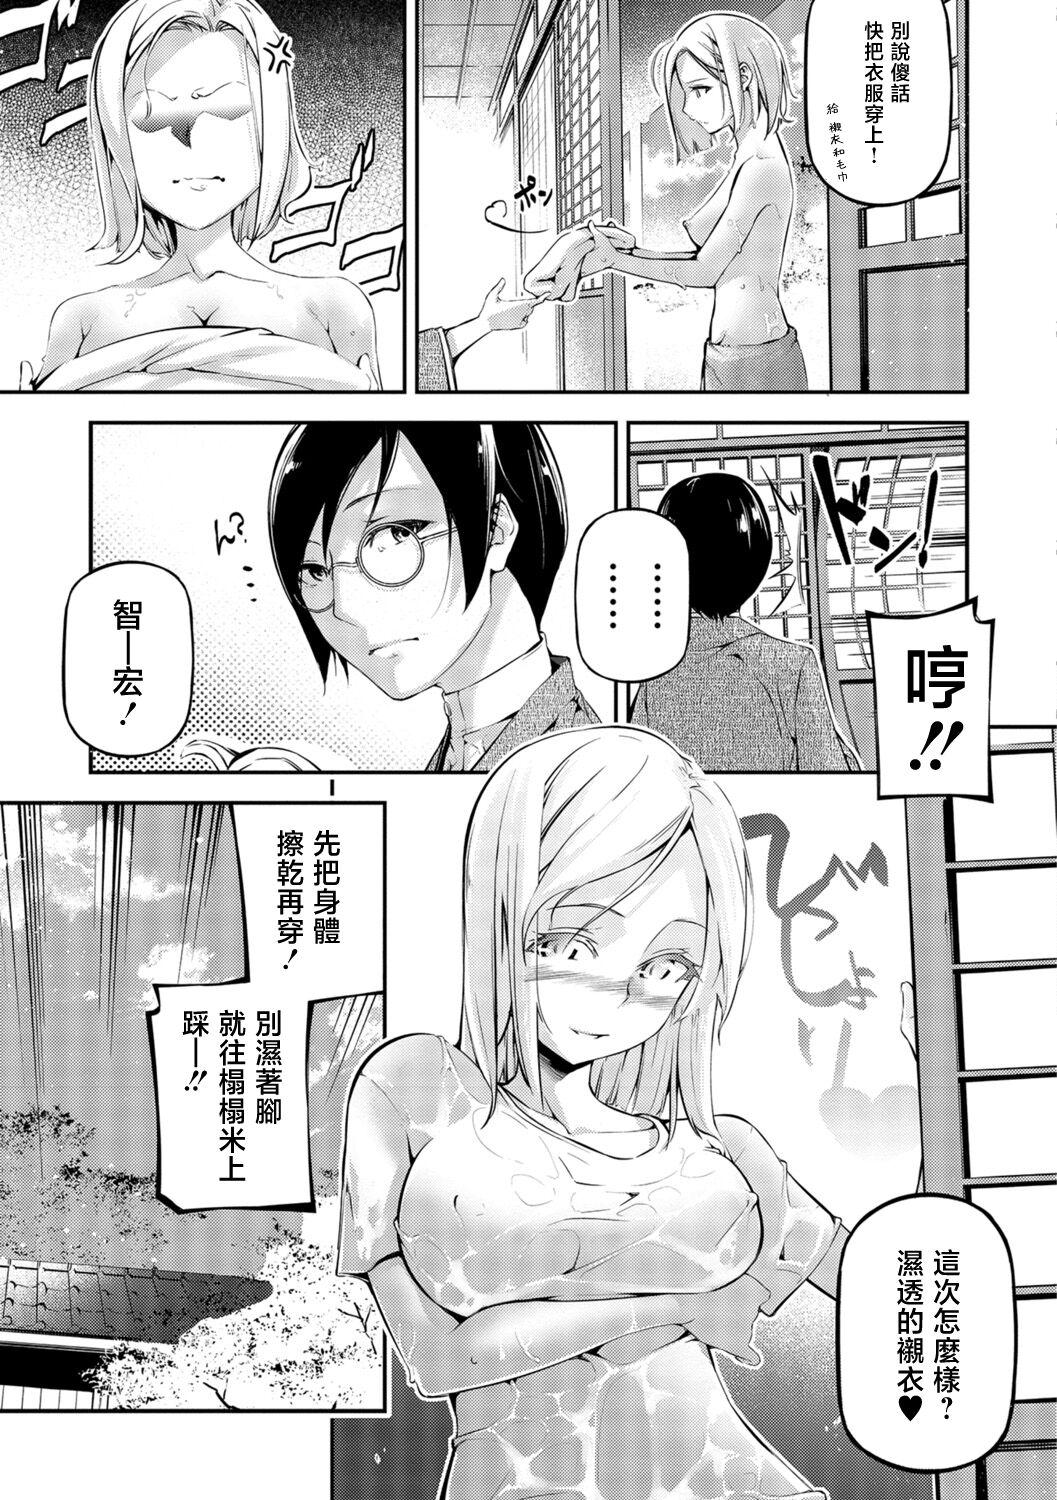 Adult サクラシンドローム Sexo - Page 7